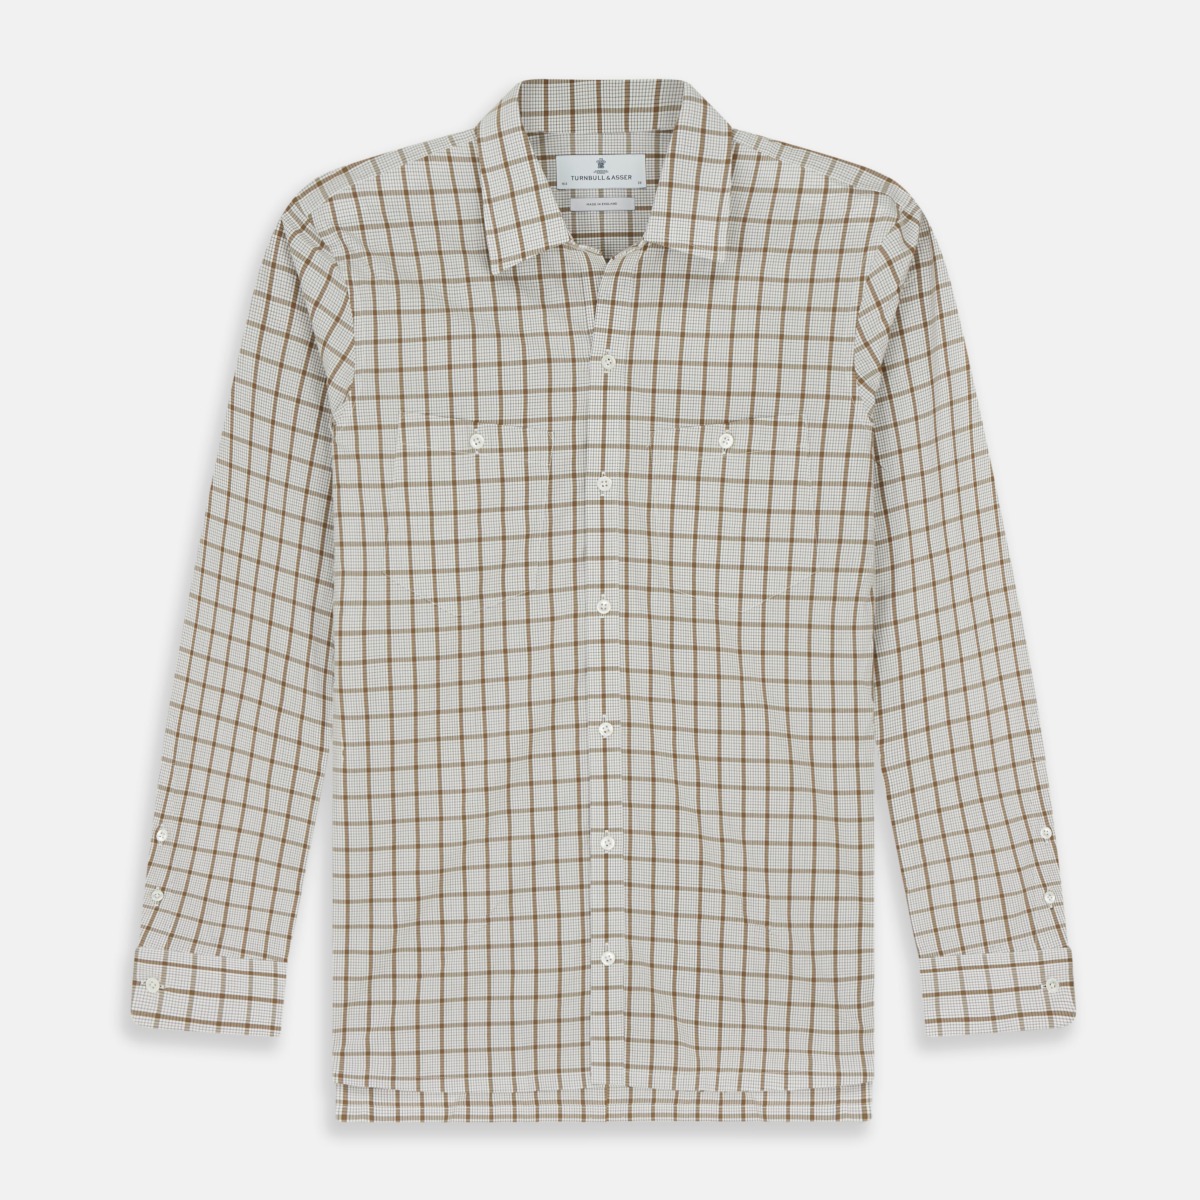 Gents Shirt in Checked at Turnbull And Asser GOOFASH